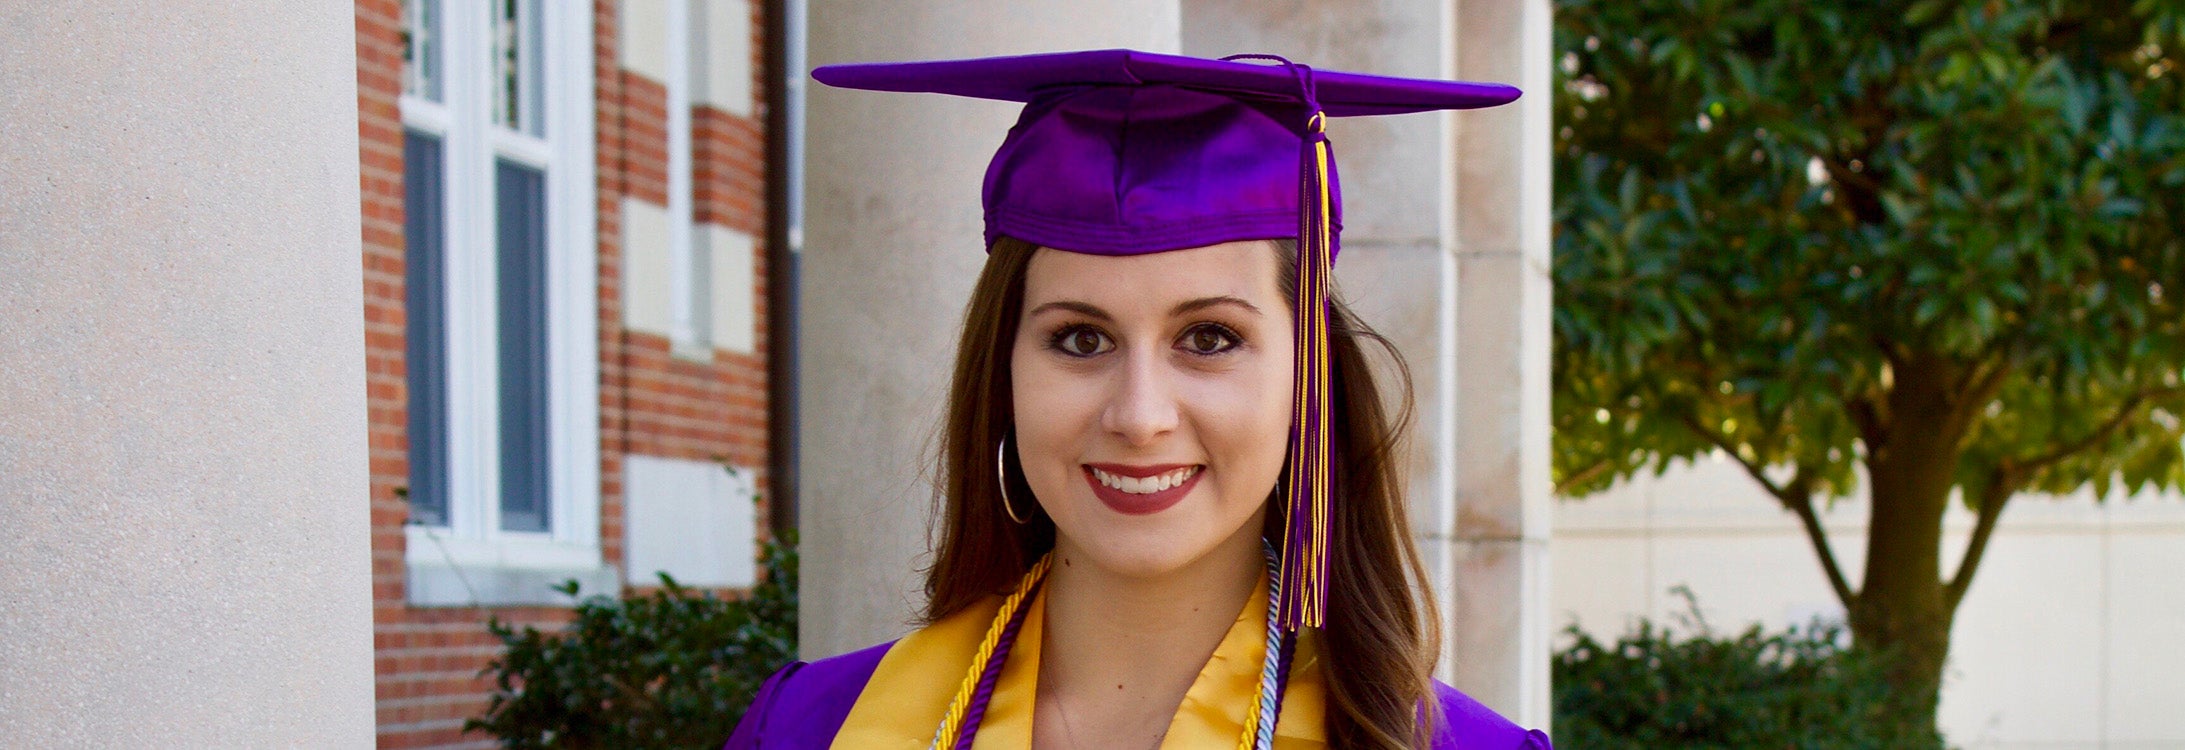 Dance education major Katie White is a fourth generation Pirate who has a long line of mentors and influencers supporting her journey to ECU.